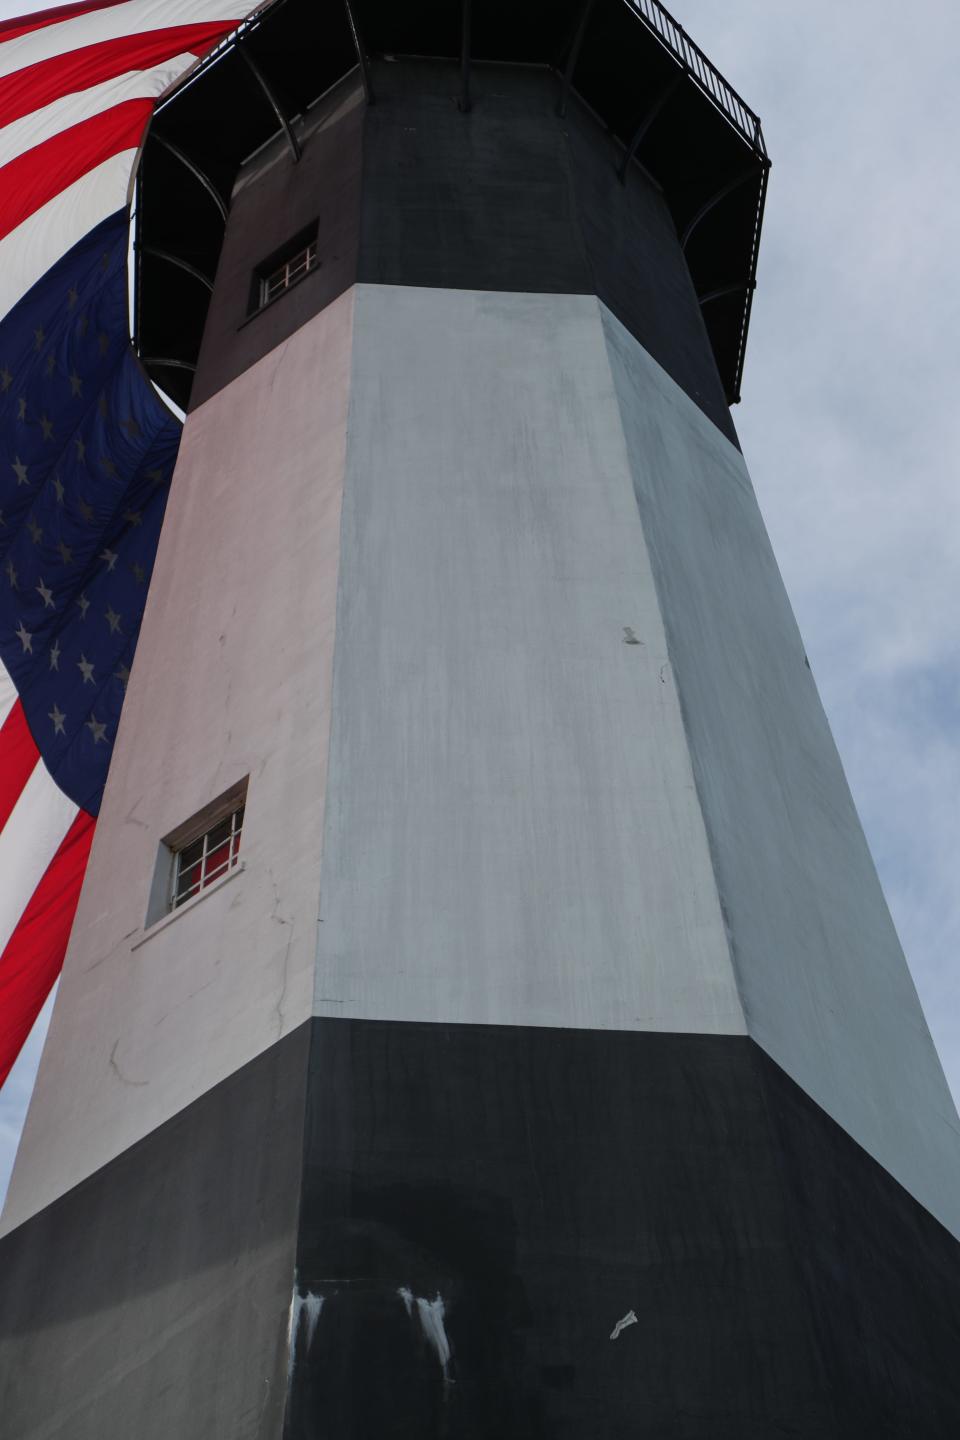 Streaks can be seen down the white paint on the side of the Tybee Island Lighthouse. Stucco repairs and a fresh coat of paint are among the restoration needs at the lighthouse.